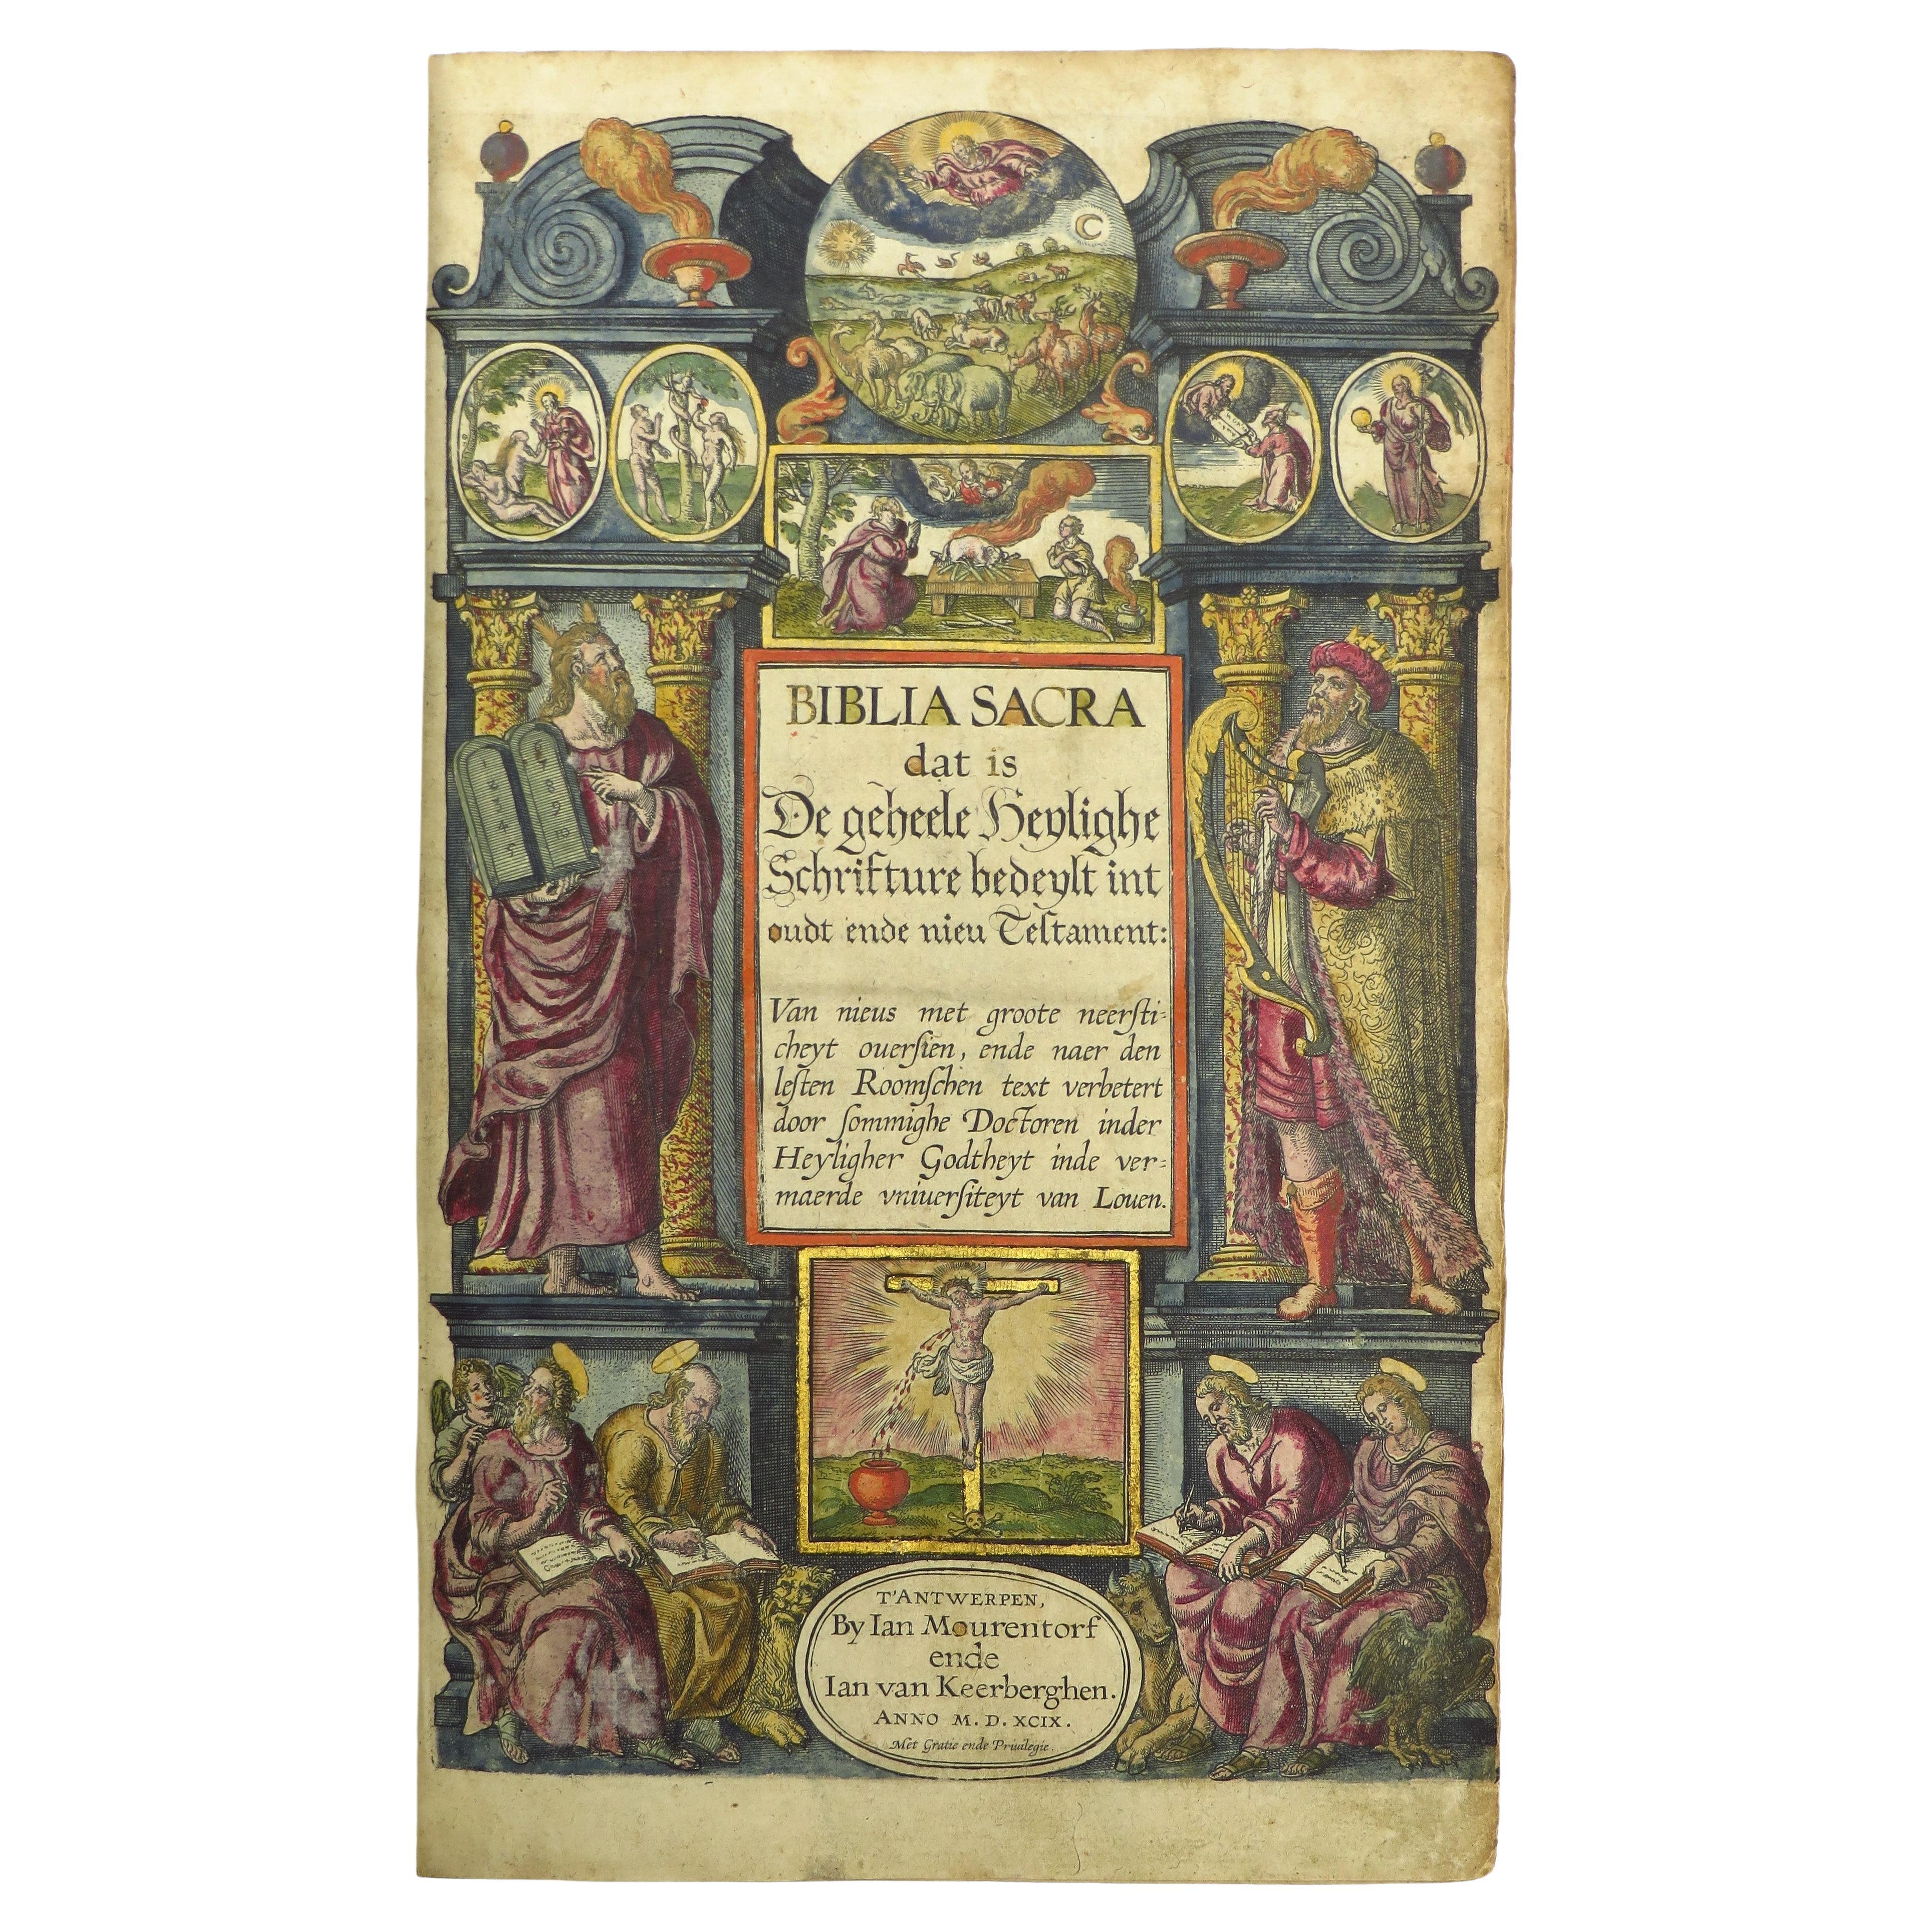 Hand-colored 16th century copy of the famous Moerentorf Bible